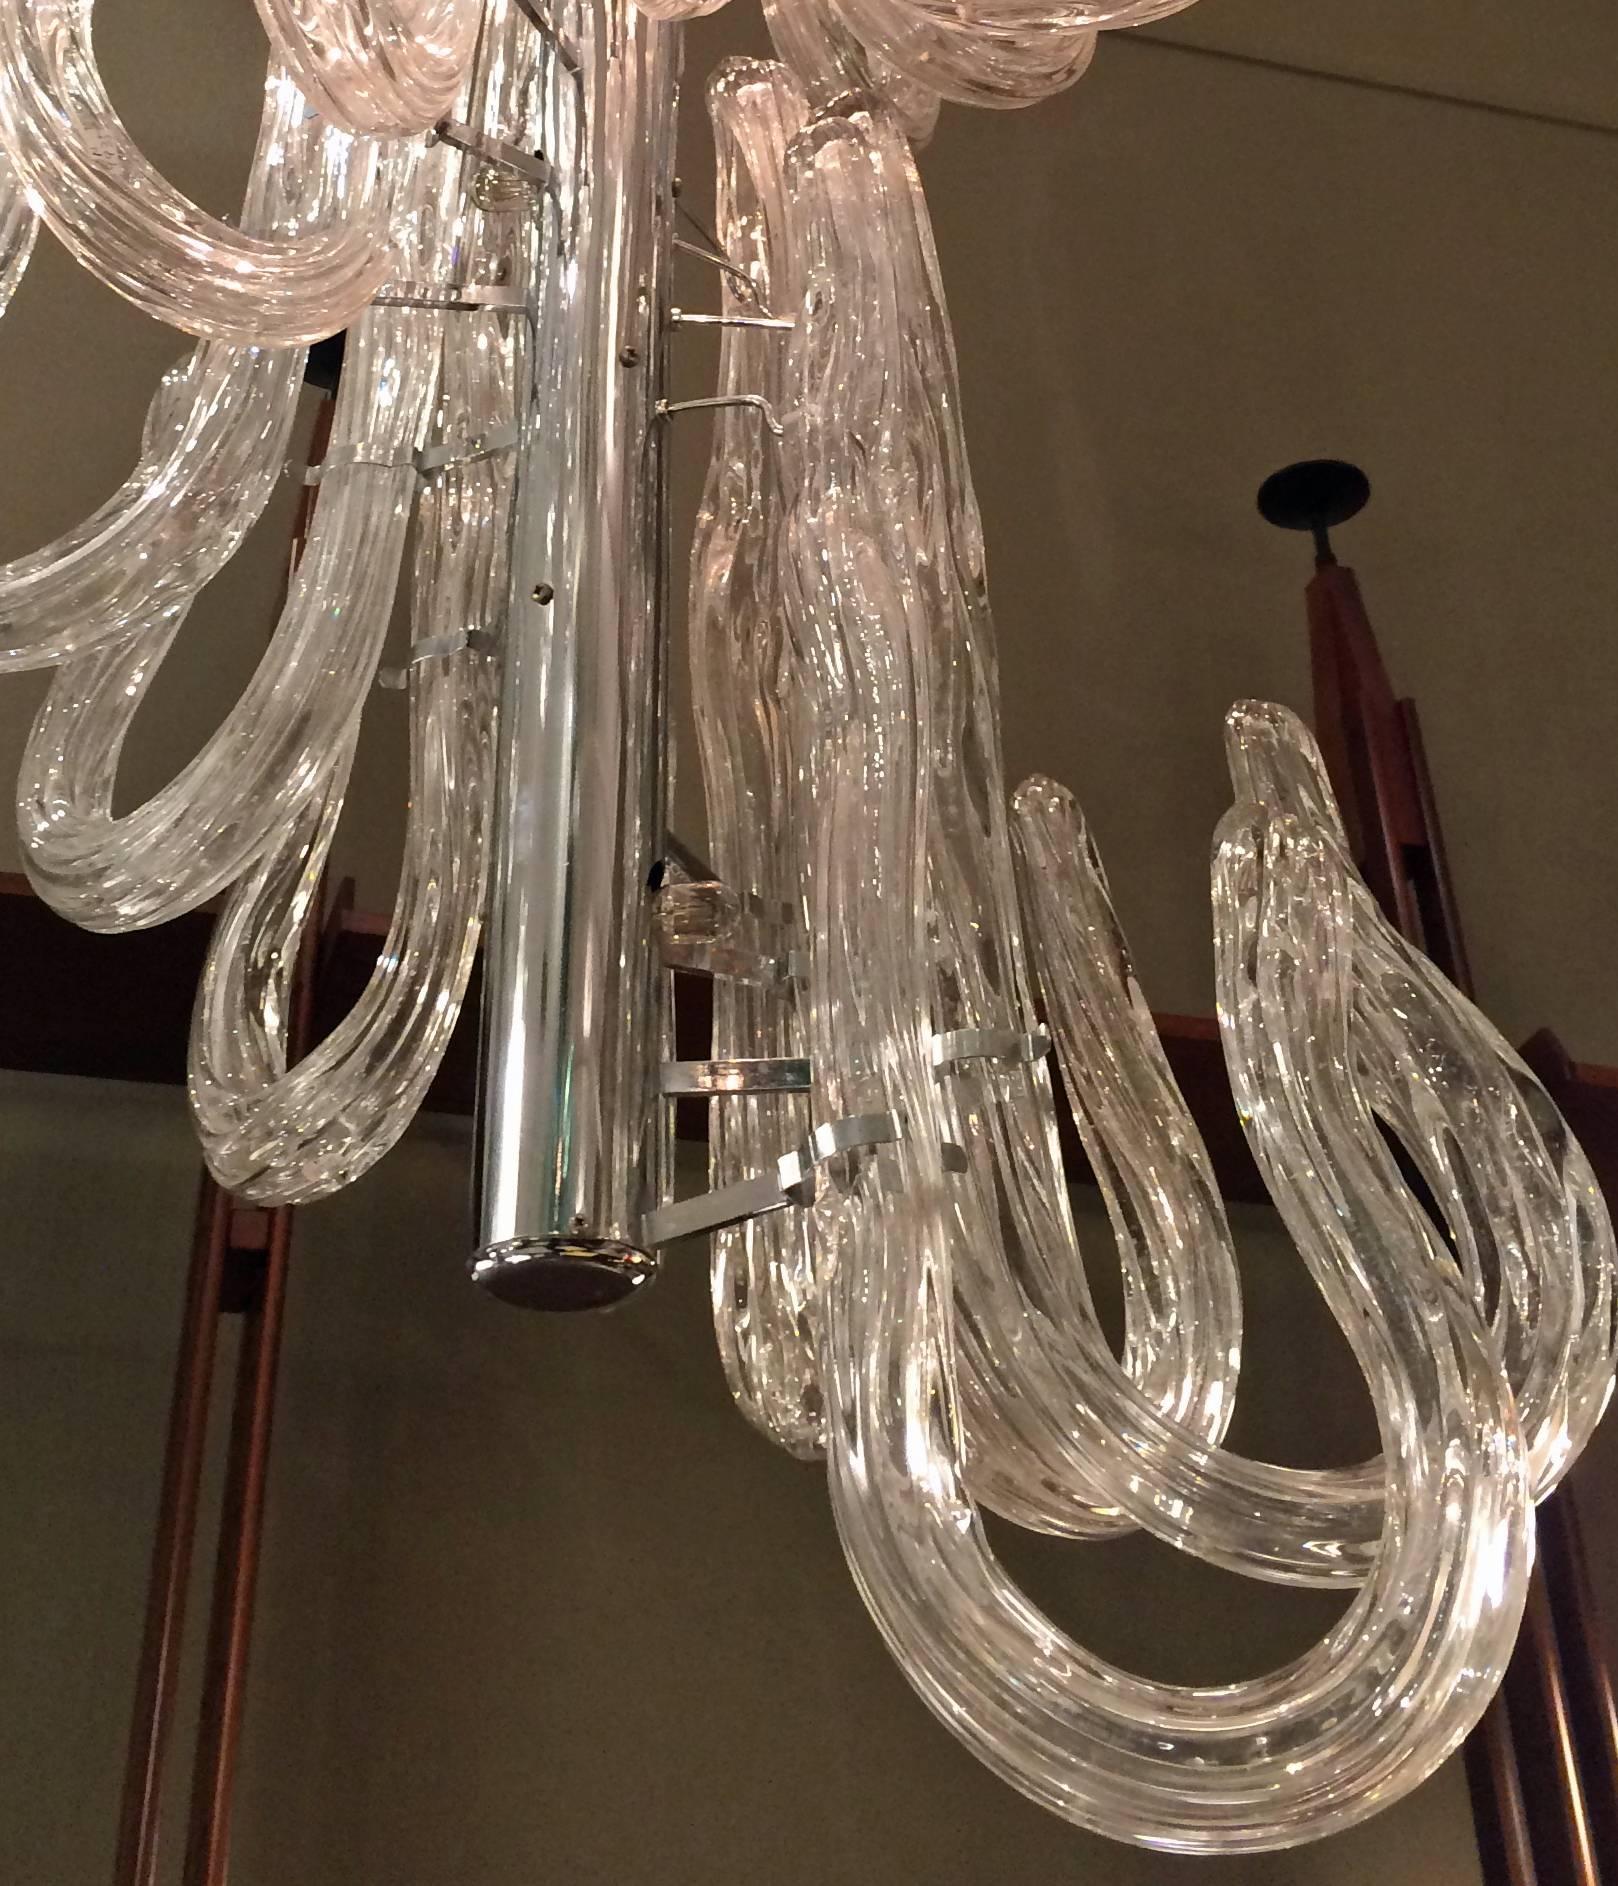 Clear glass elements in the shape of canes hung upside down on a nickel-plated rod.

      

